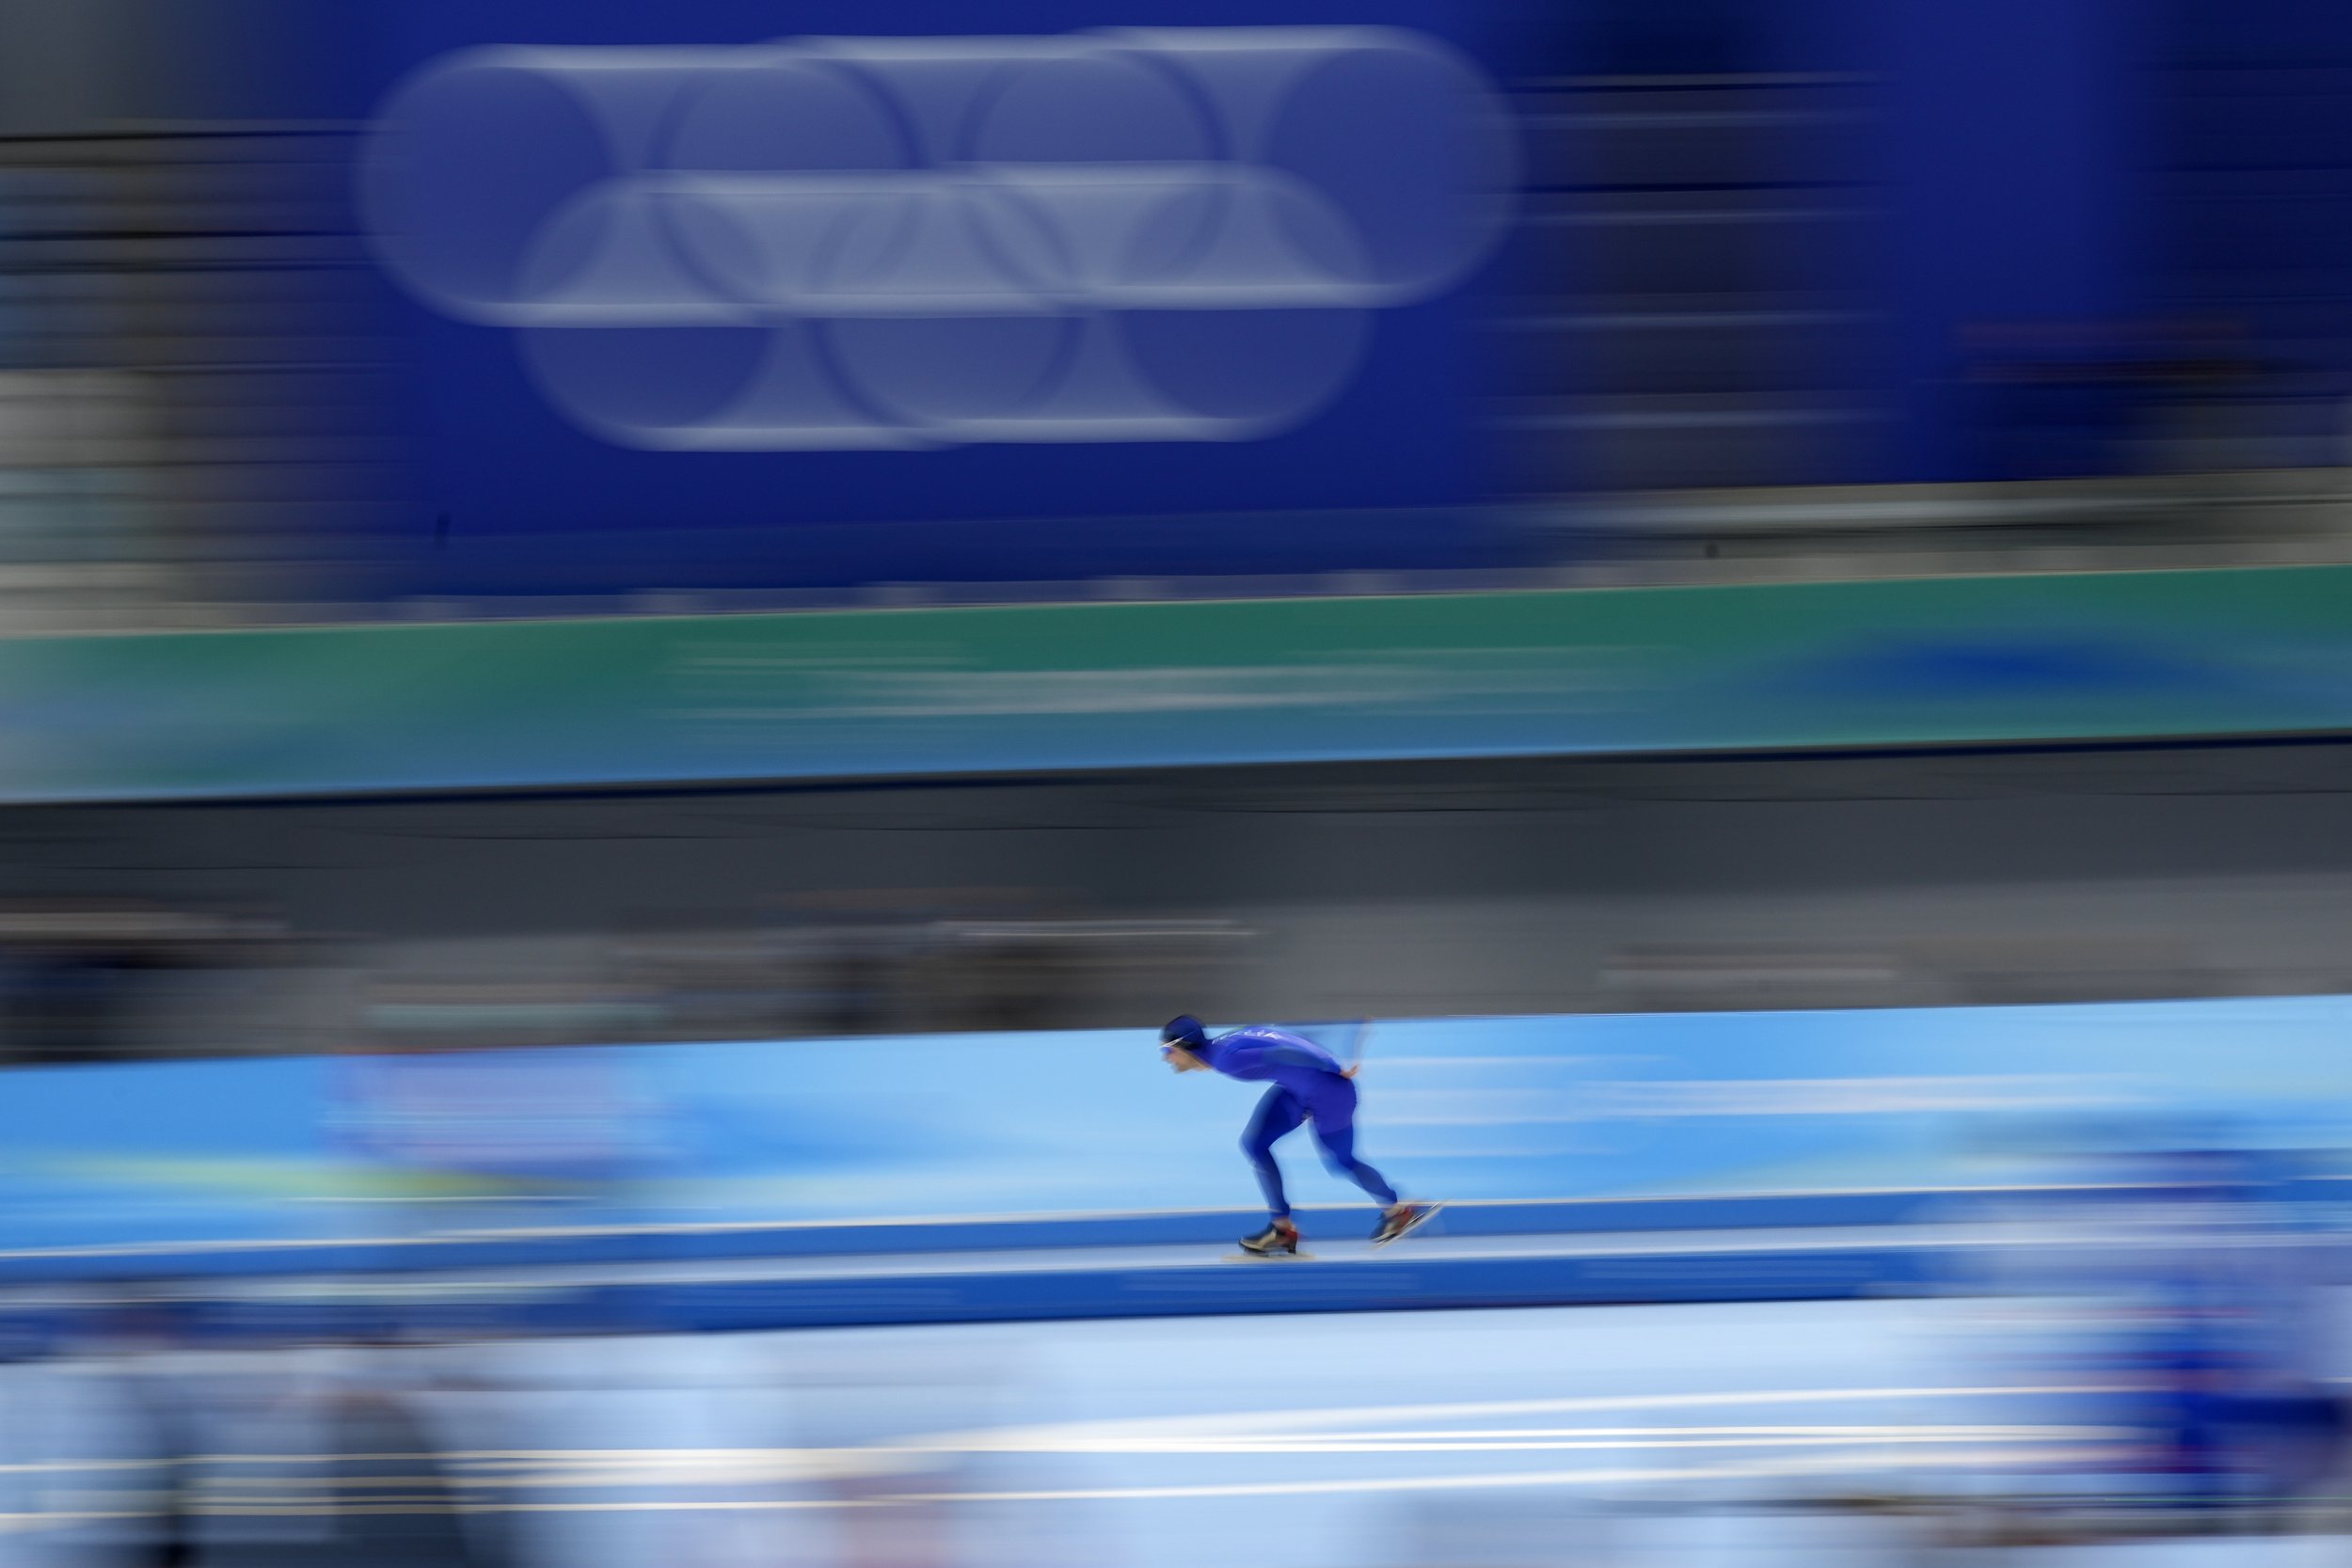  Andrea Giovannini of Italy competes during the men's speedskating 5,000-meter race at the 2022 Winter Olympics, Sunday, Feb. 6, 2022, in Beijing. (AP Photo/Ashley Landis) 